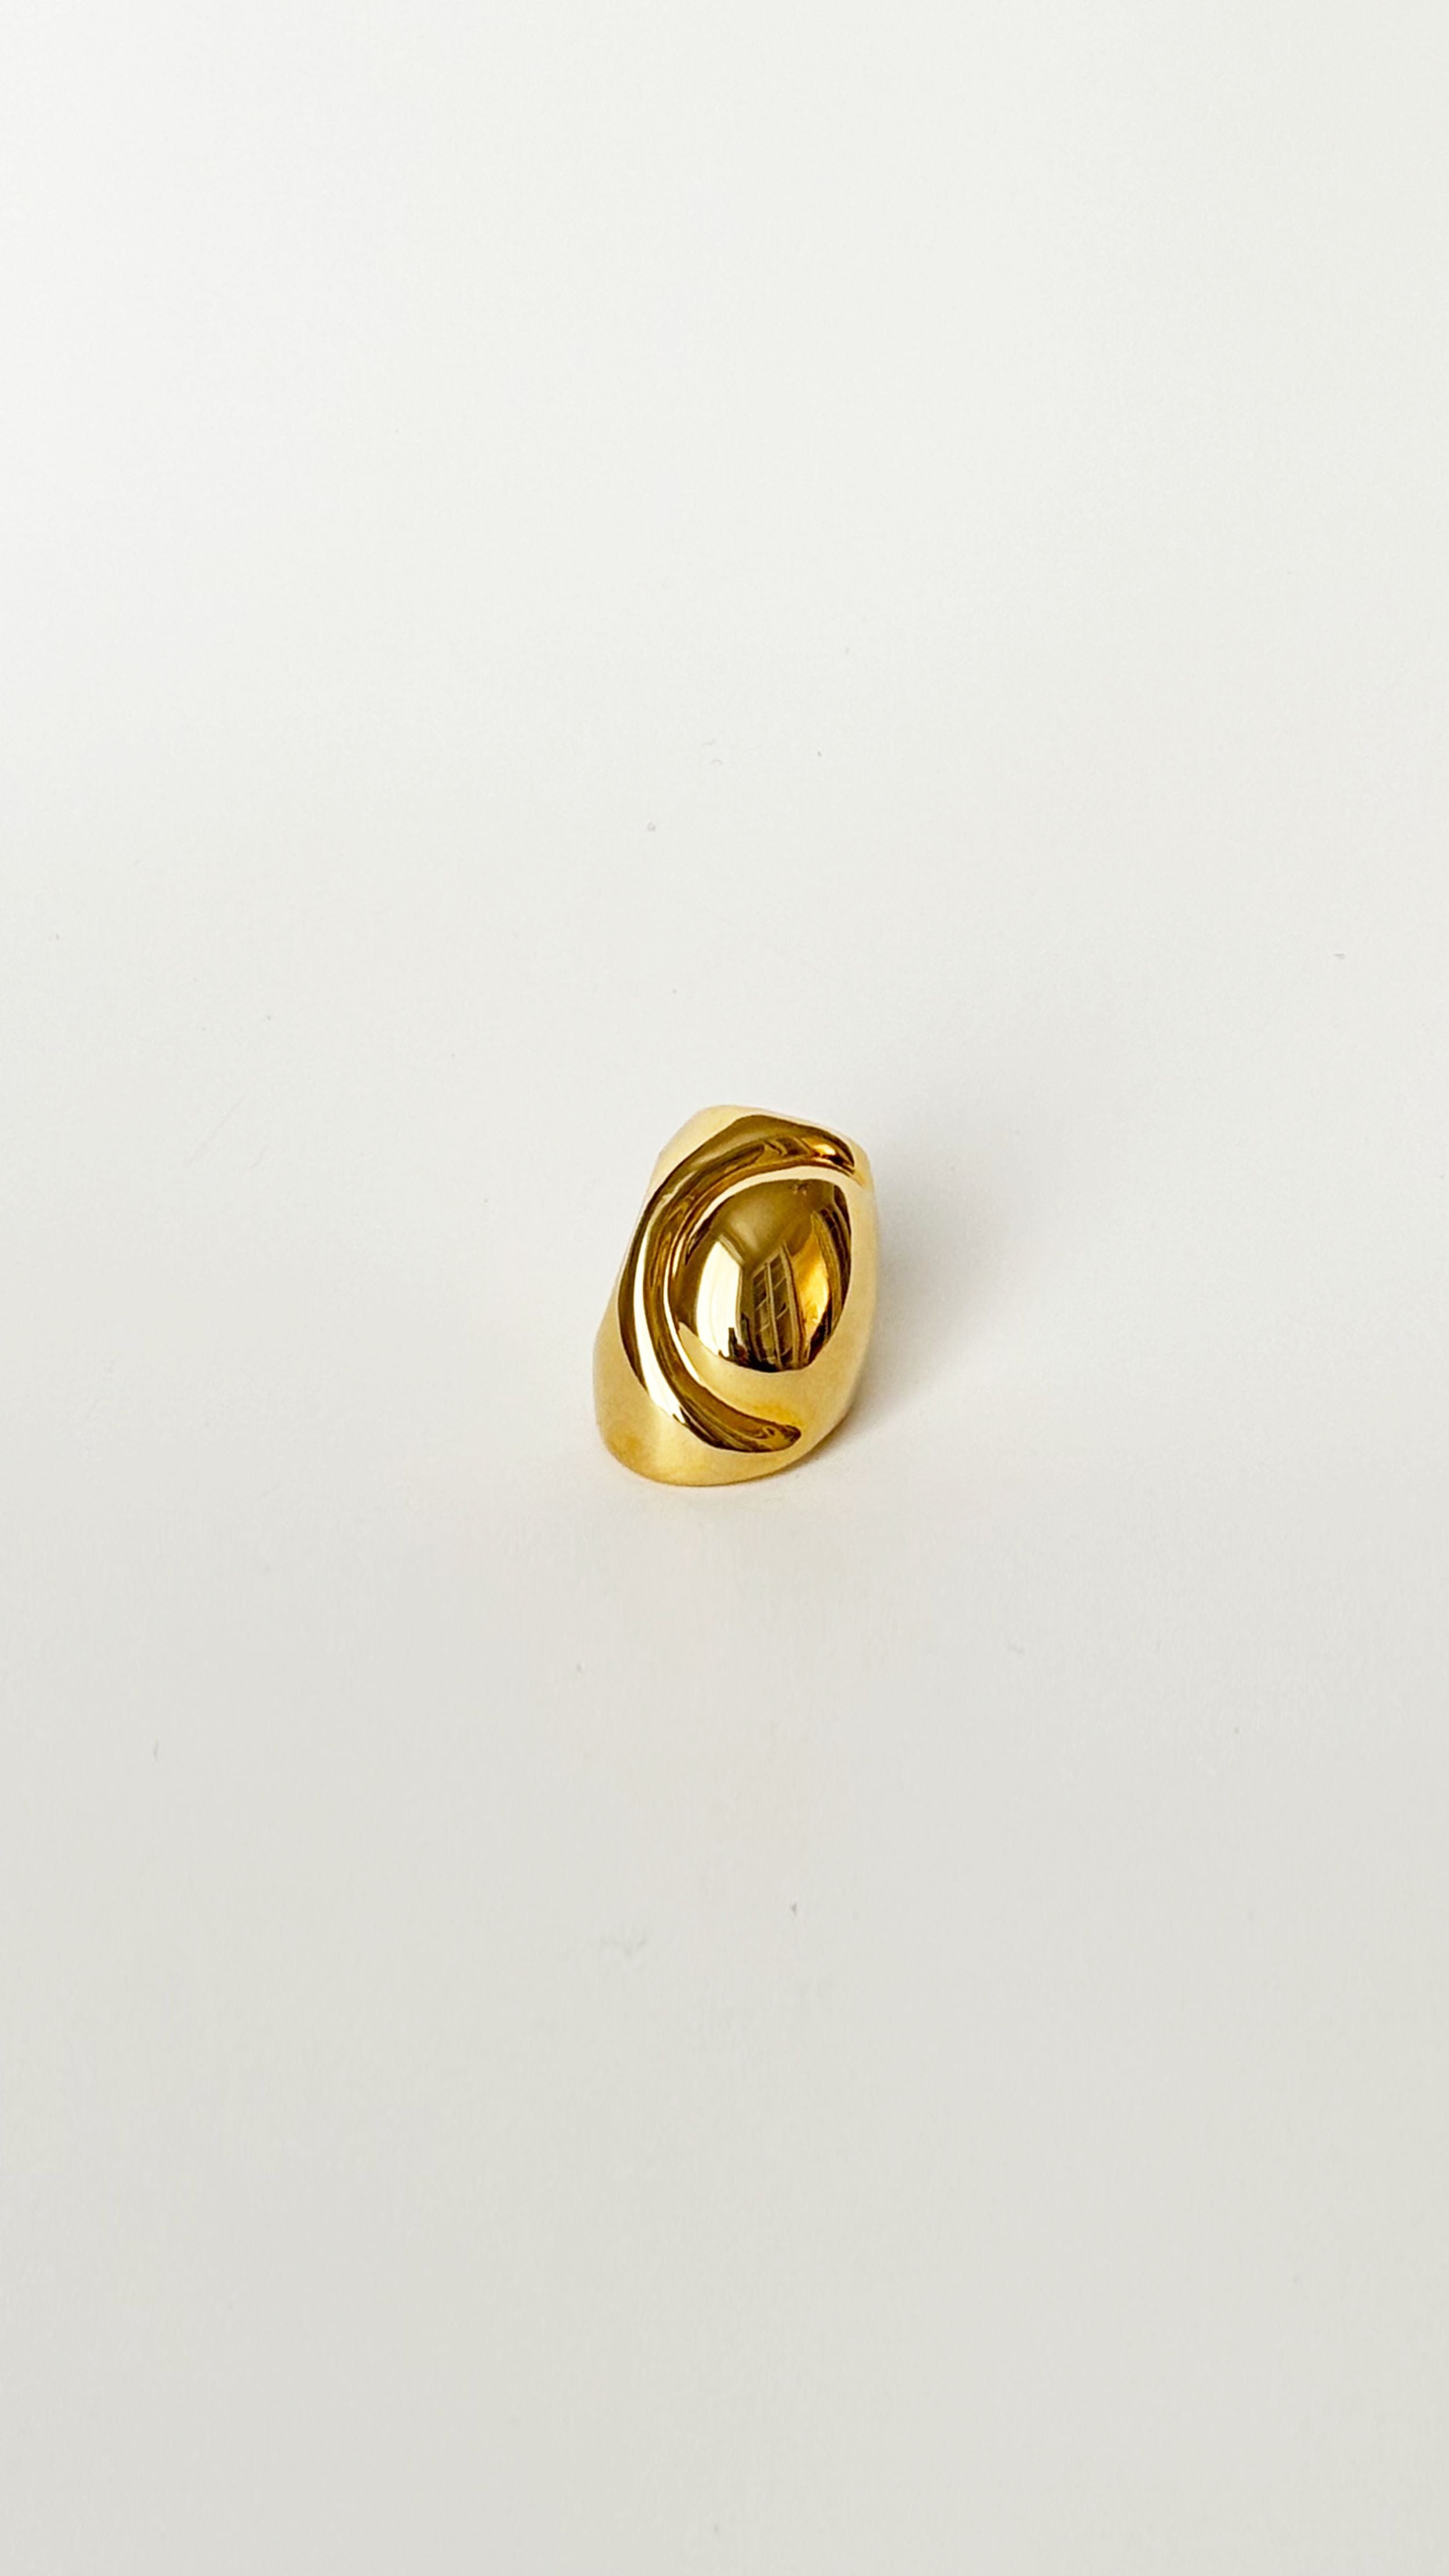 Monica Sordo Cubagua Earcuff Large. Handmade in Peru, sustainable jewelry. Photo of the 24K gold plated ear cuff from the front.